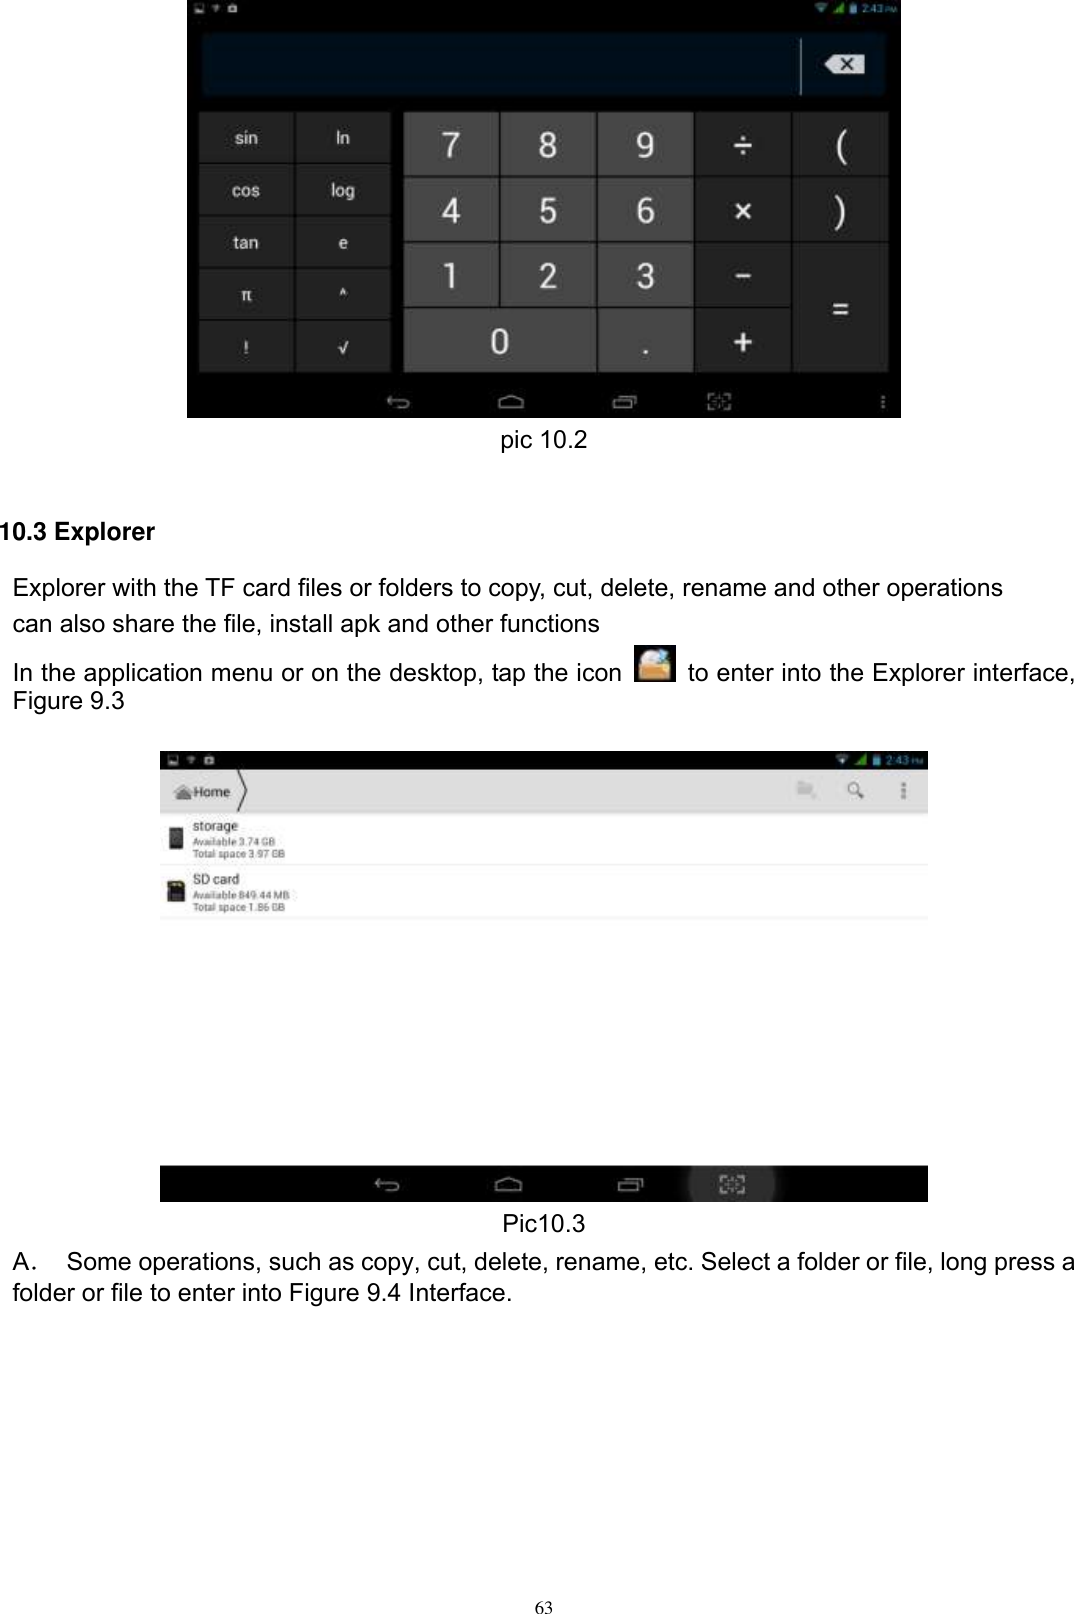      63  pic 10.2  10.3 Explorer Explorer with the TF card files or folders to copy, cut, delete, rename and other operations can also share the file, install apk and other functions In the application menu or on the desktop, tap the icon    to enter into the Explorer interface, Figure 9.3   Pic10.3 A．  Some operations, such as copy, cut, delete, rename, etc. Select a folder or file, long press a folder or file to enter into Figure 9.4 Interface. 